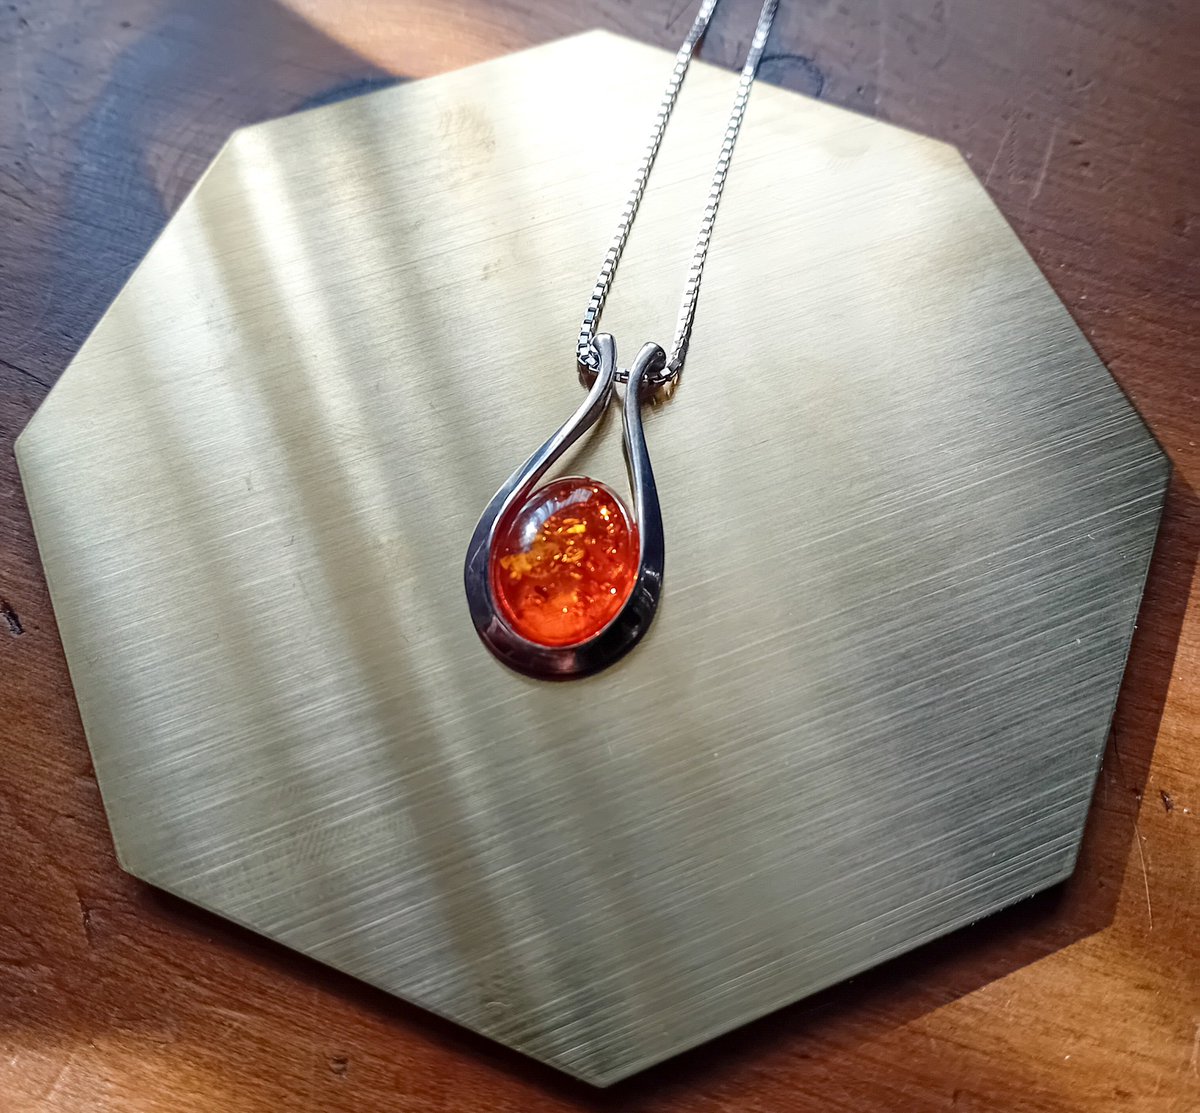 If you love all things Amber, I have these beautiful pieces in the shop 🧡 amanteboutiqueshop.myshopify.com #elevenseshour